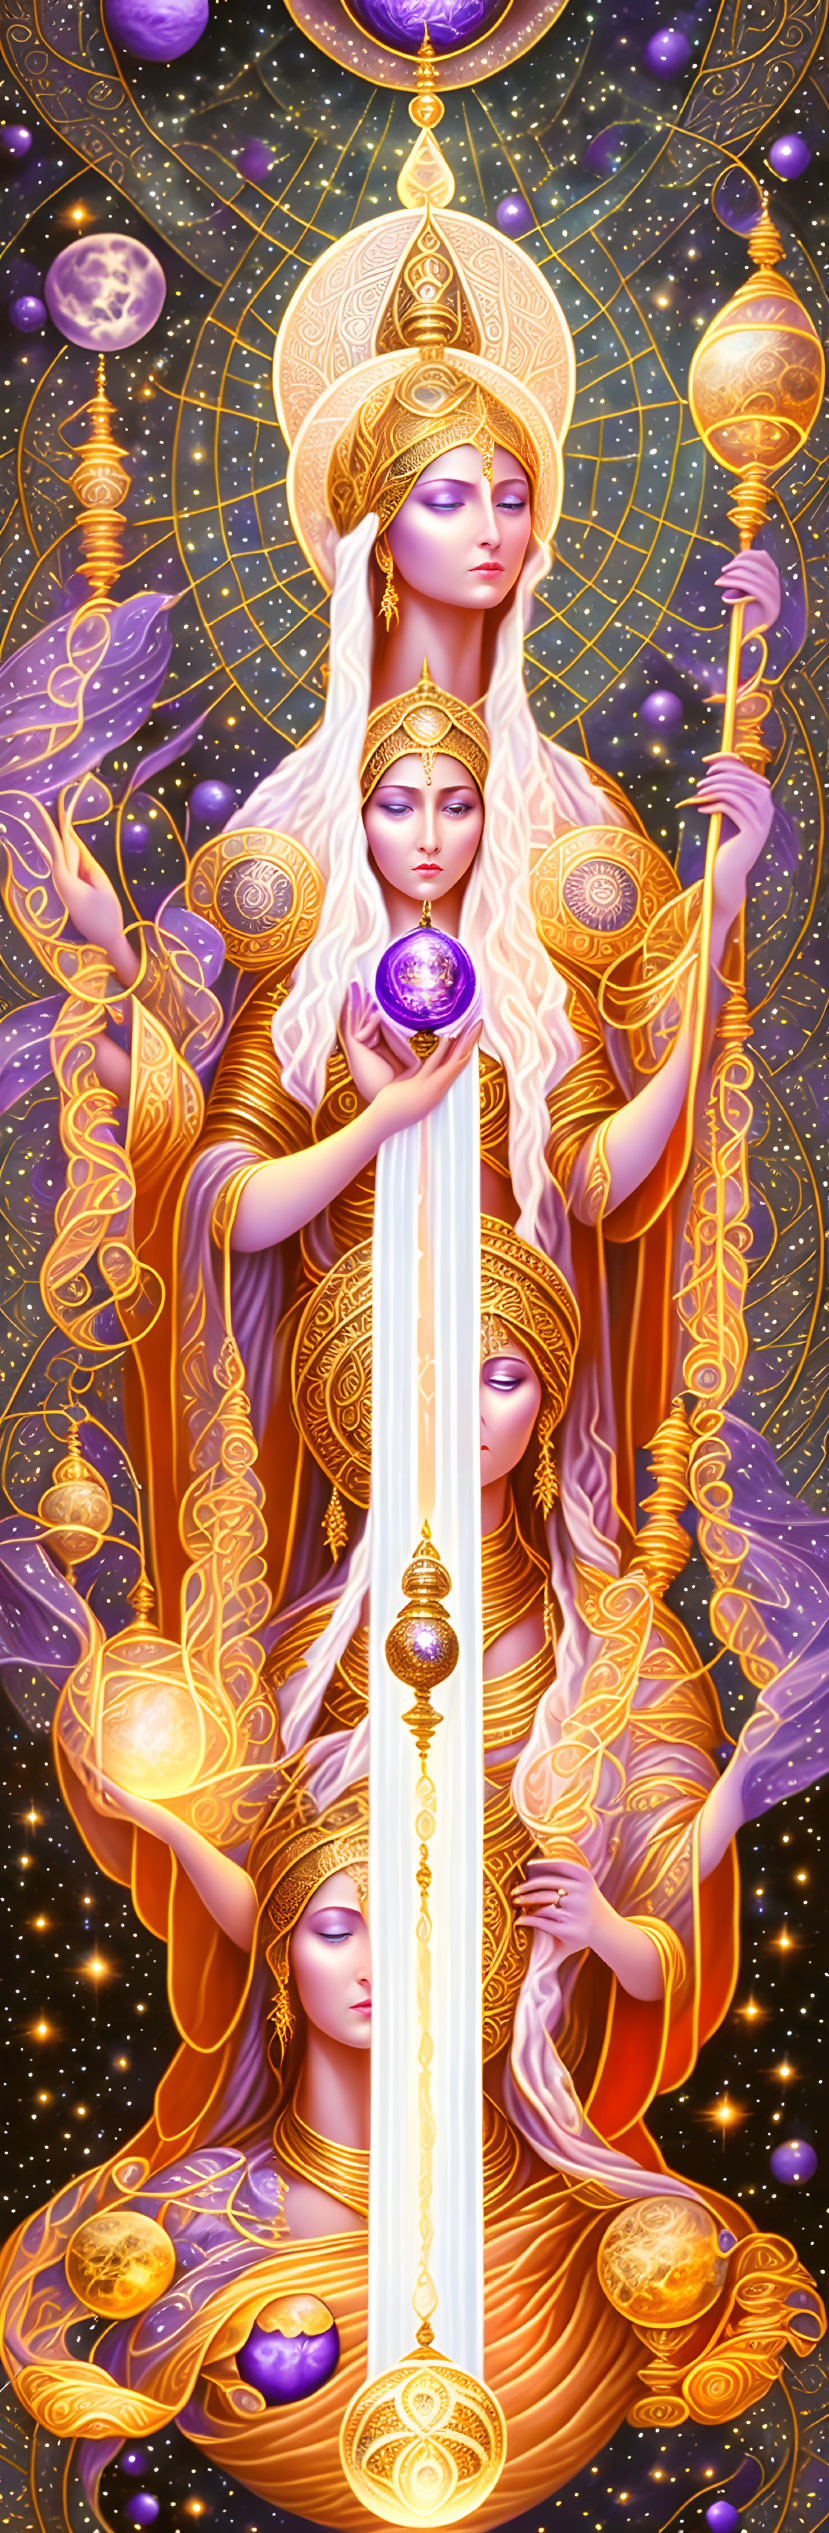 Golden-clad multi-armed figure with spheres and staff on cosmic purple backdrop